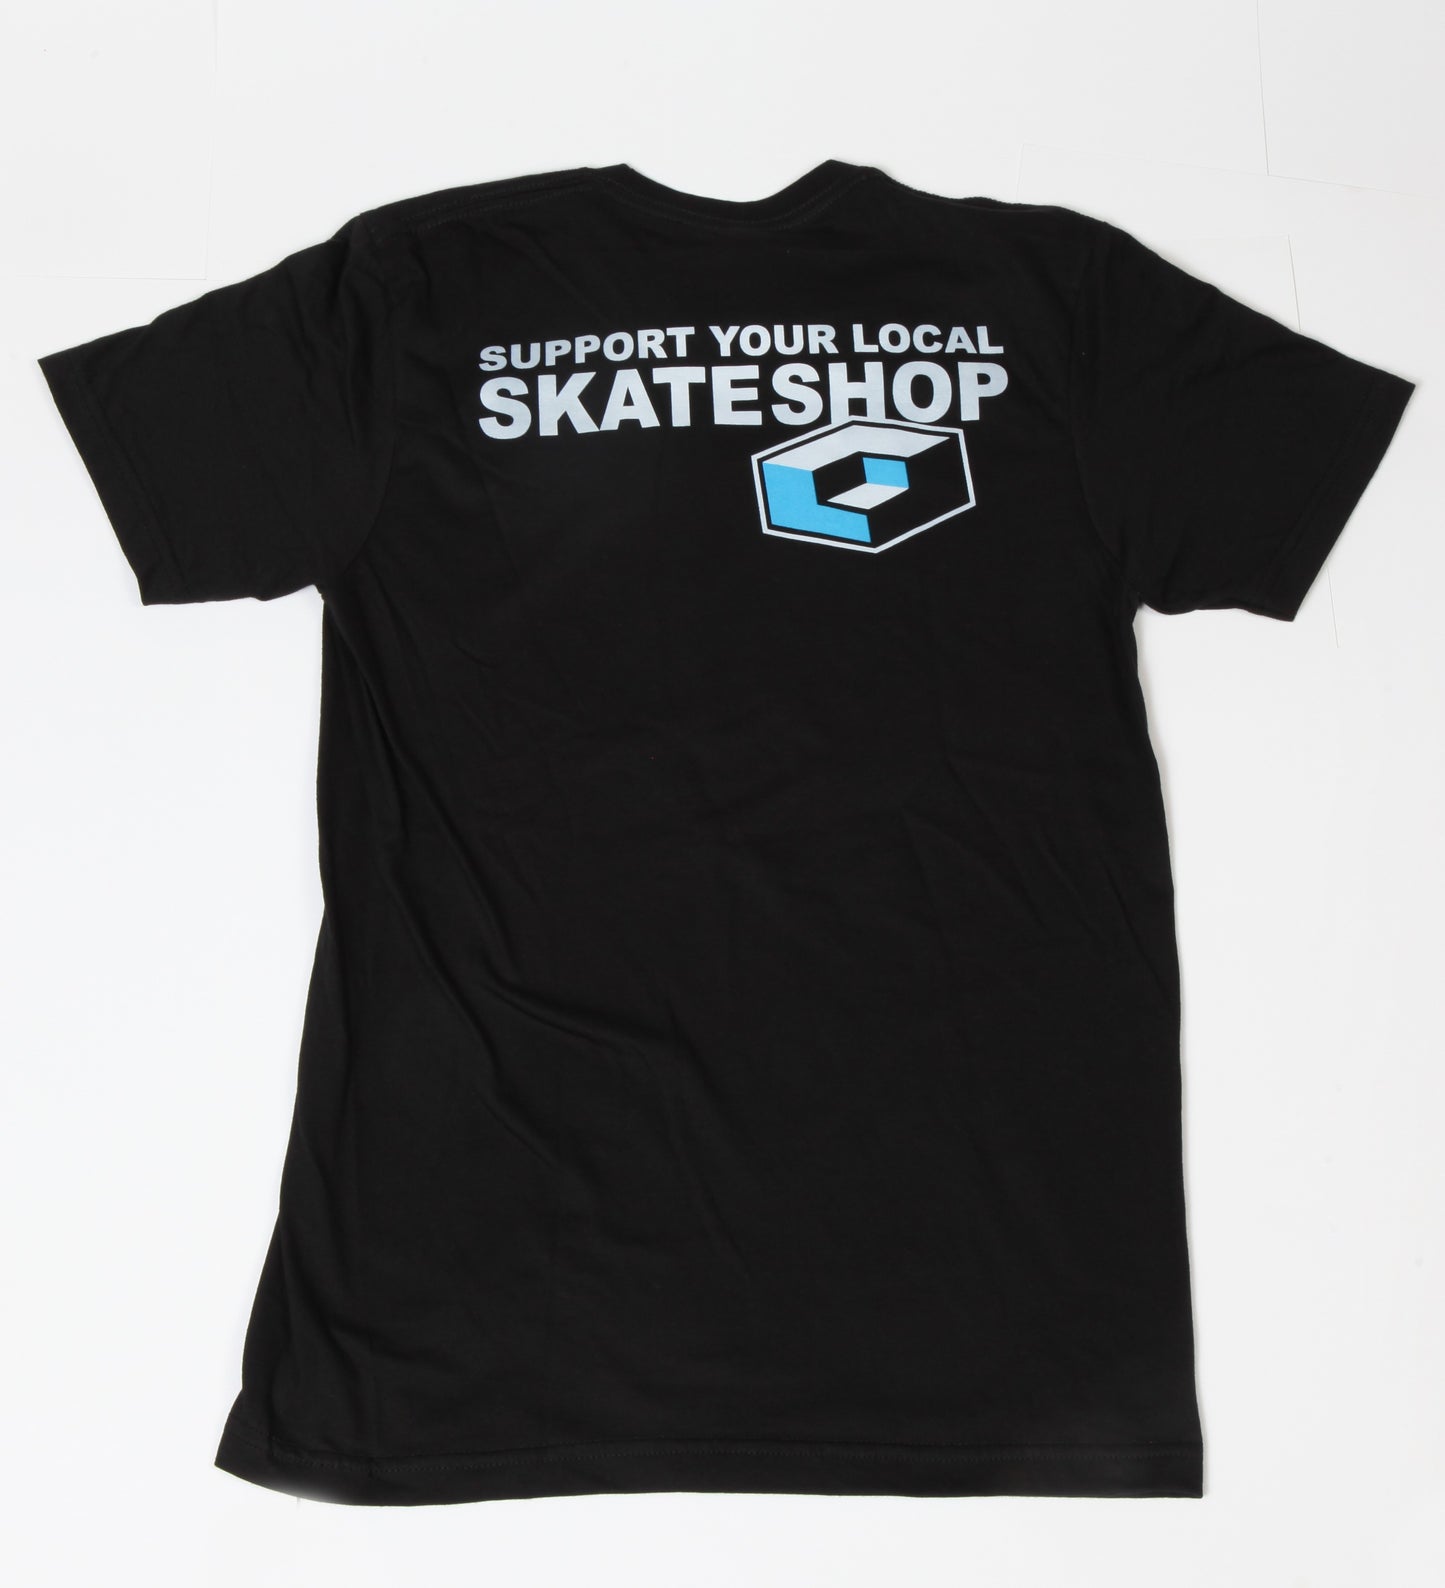 Skaters Advocate Endless Pursuit / Consolidated Support Your Local Skateshop Tee Shirt